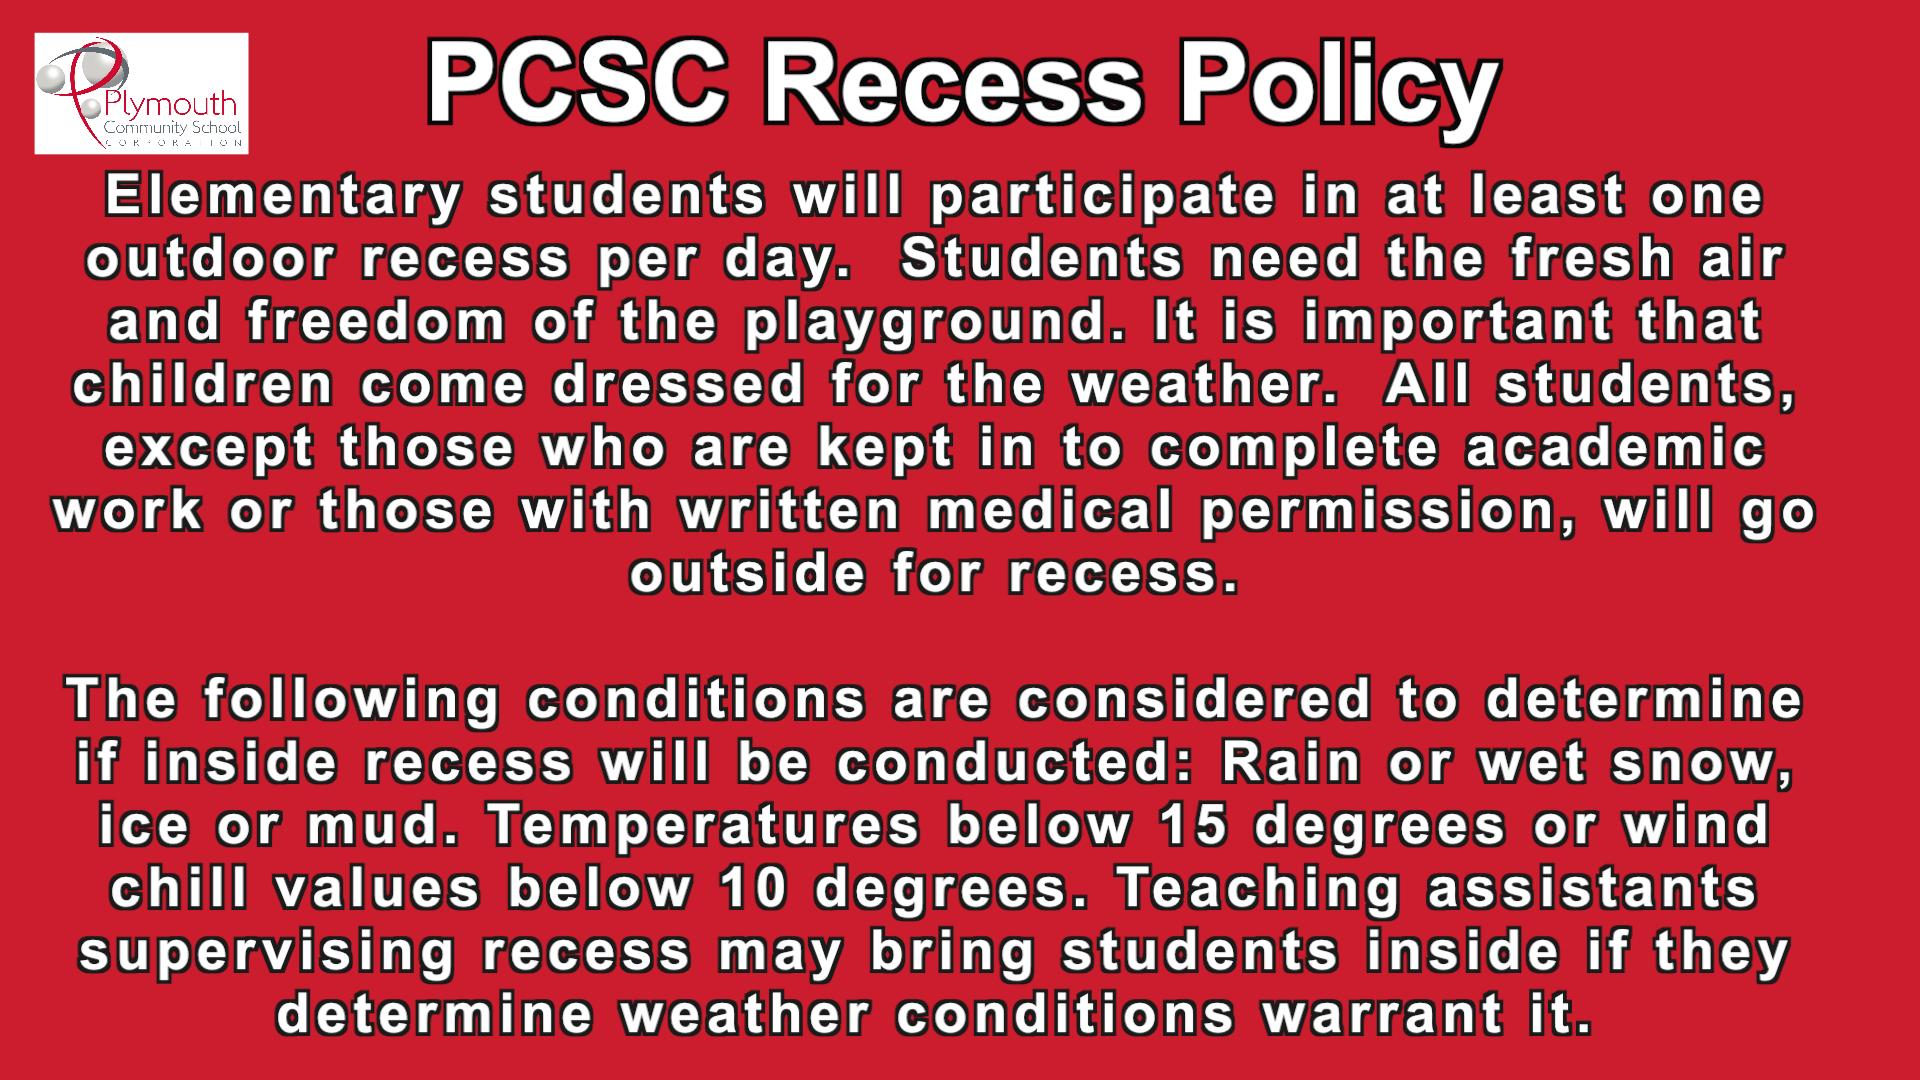 PCSC Recess Policy - Elementary students will participate in at least one outdoor recess per day. Students need the fresh air and freedom of the playground. It is important that children come dressed for the weather. All students, except those who are kept in to complete academic work or those with written medica permission, will go outside for recess. The following conditions are considered to determine if inside recess will be conducted: Rain or wet snow, ice or mud. Temperatures below 15 degrees or wind chill values below 10 degrees. Teaching assistants supervising recess may bring students inside if they determine weather conditions warrant it.